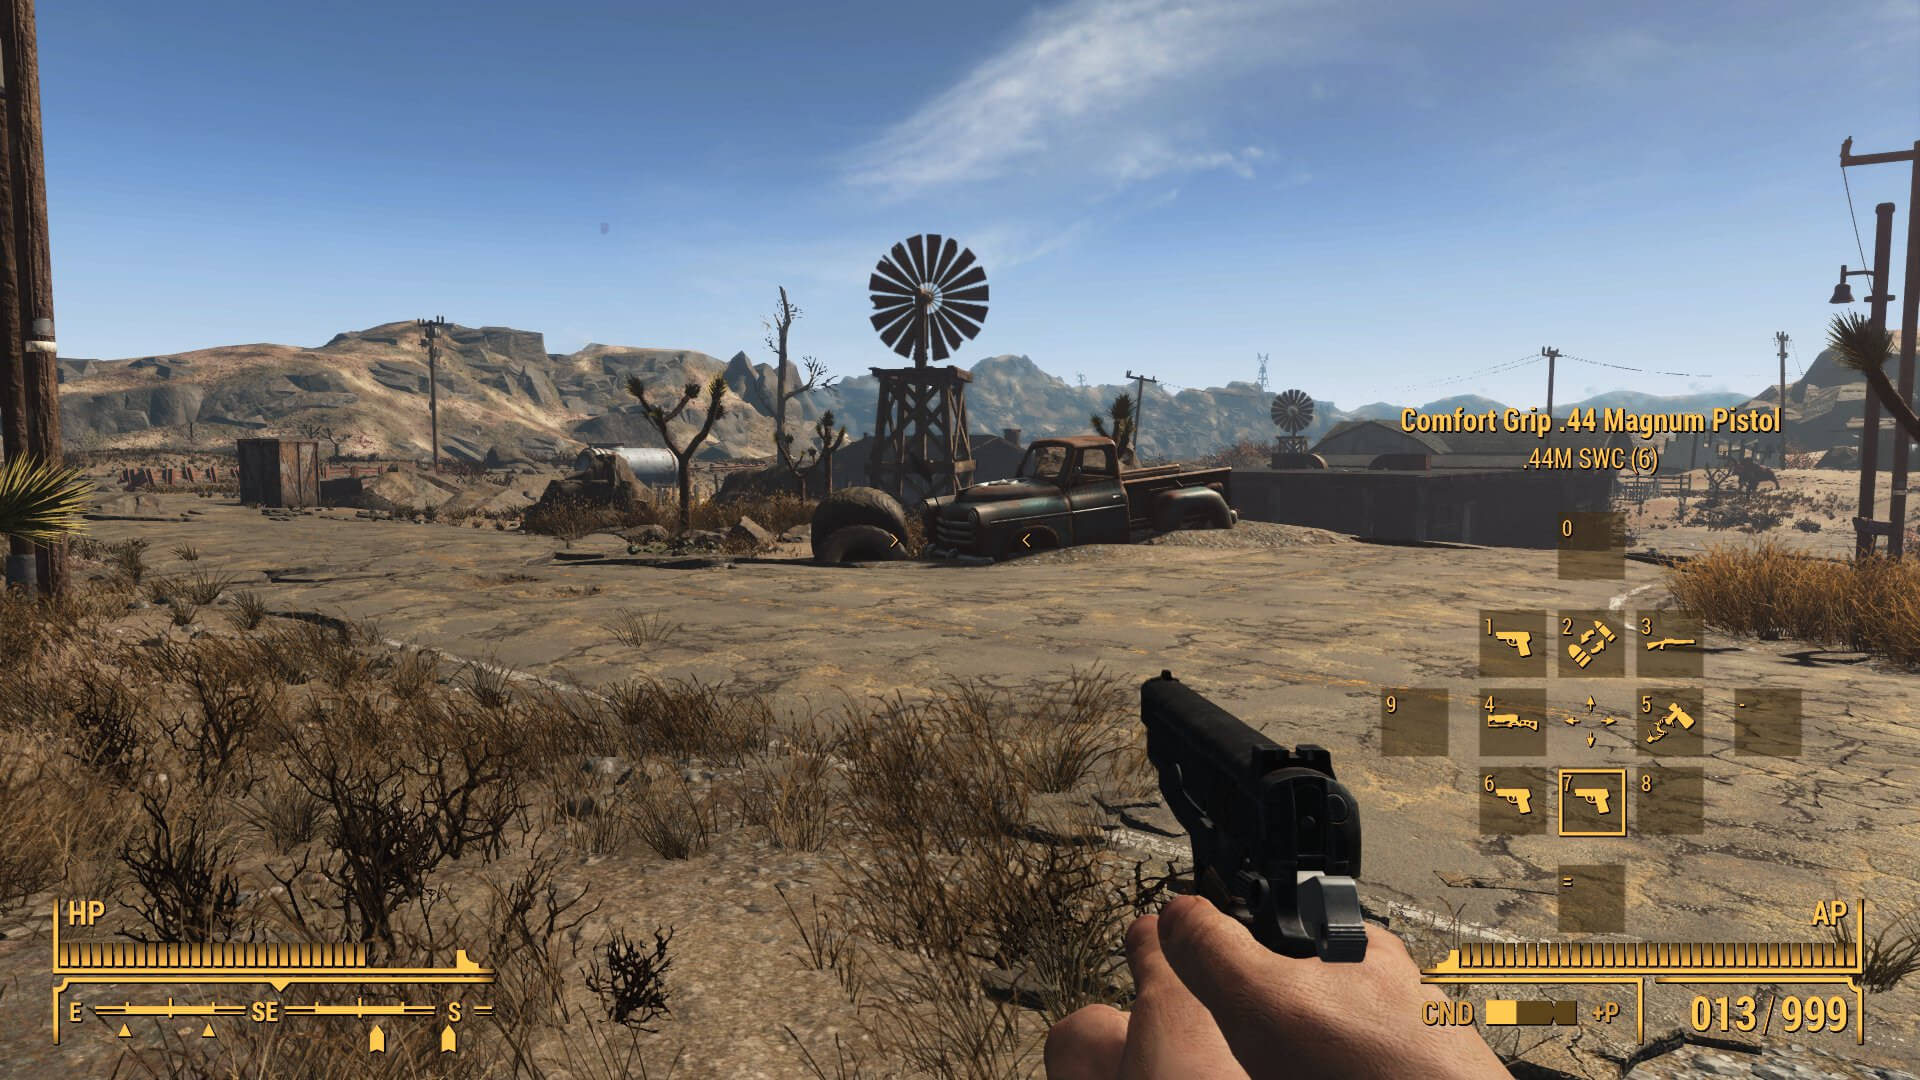 Fallout: New Vegas System Requirements